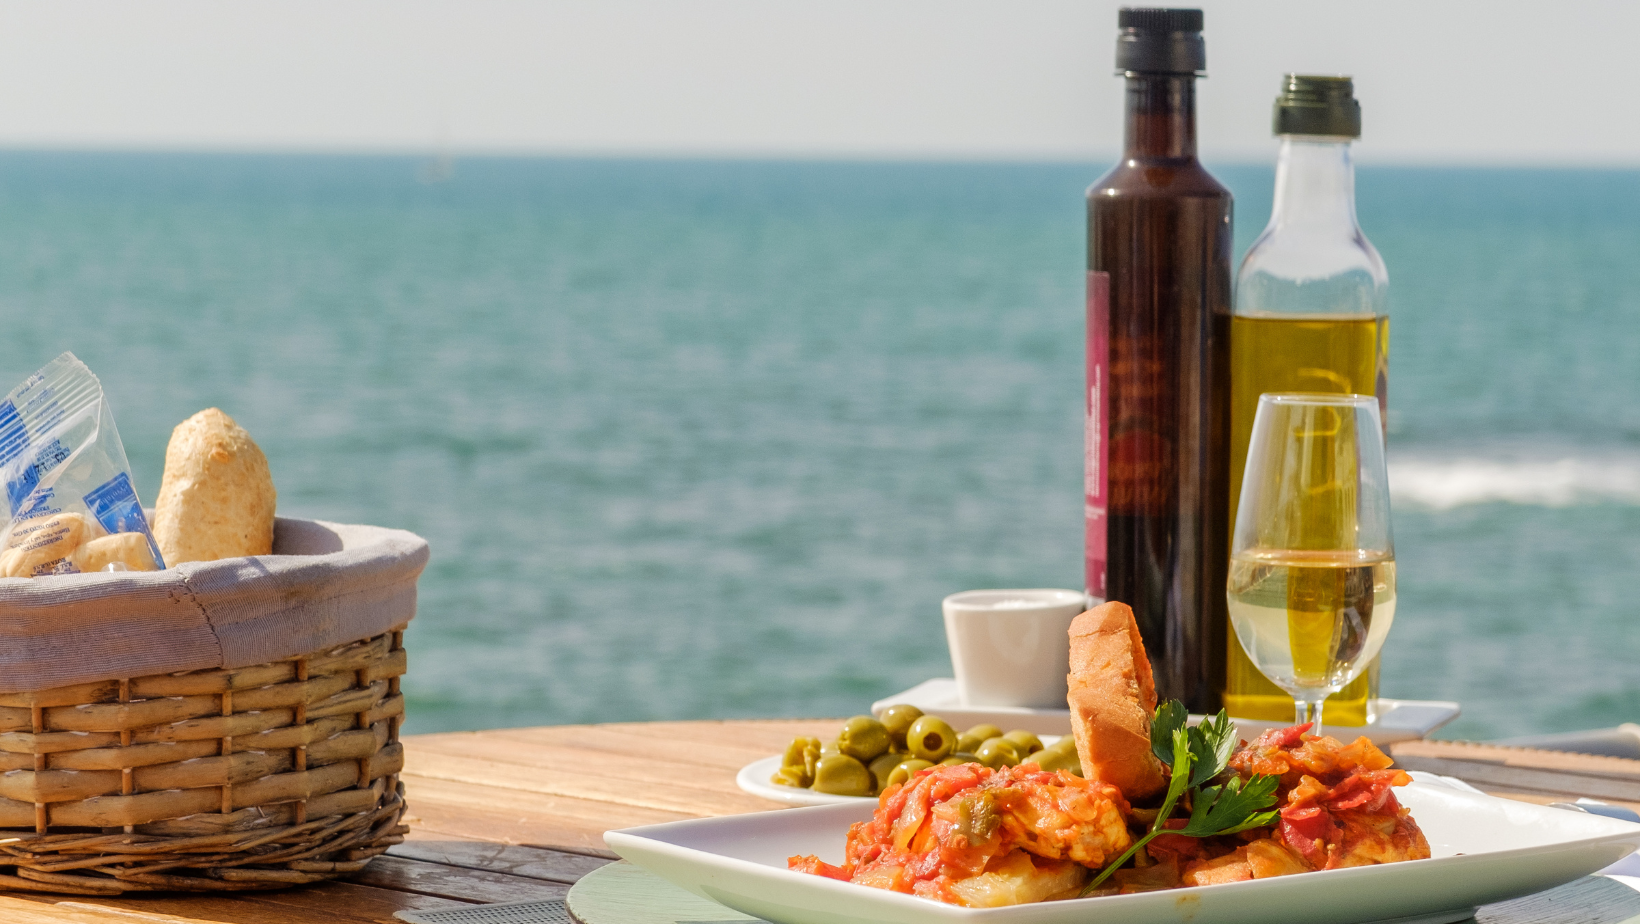 Guide to a Healthy Mediterranean Eating Lifestyle